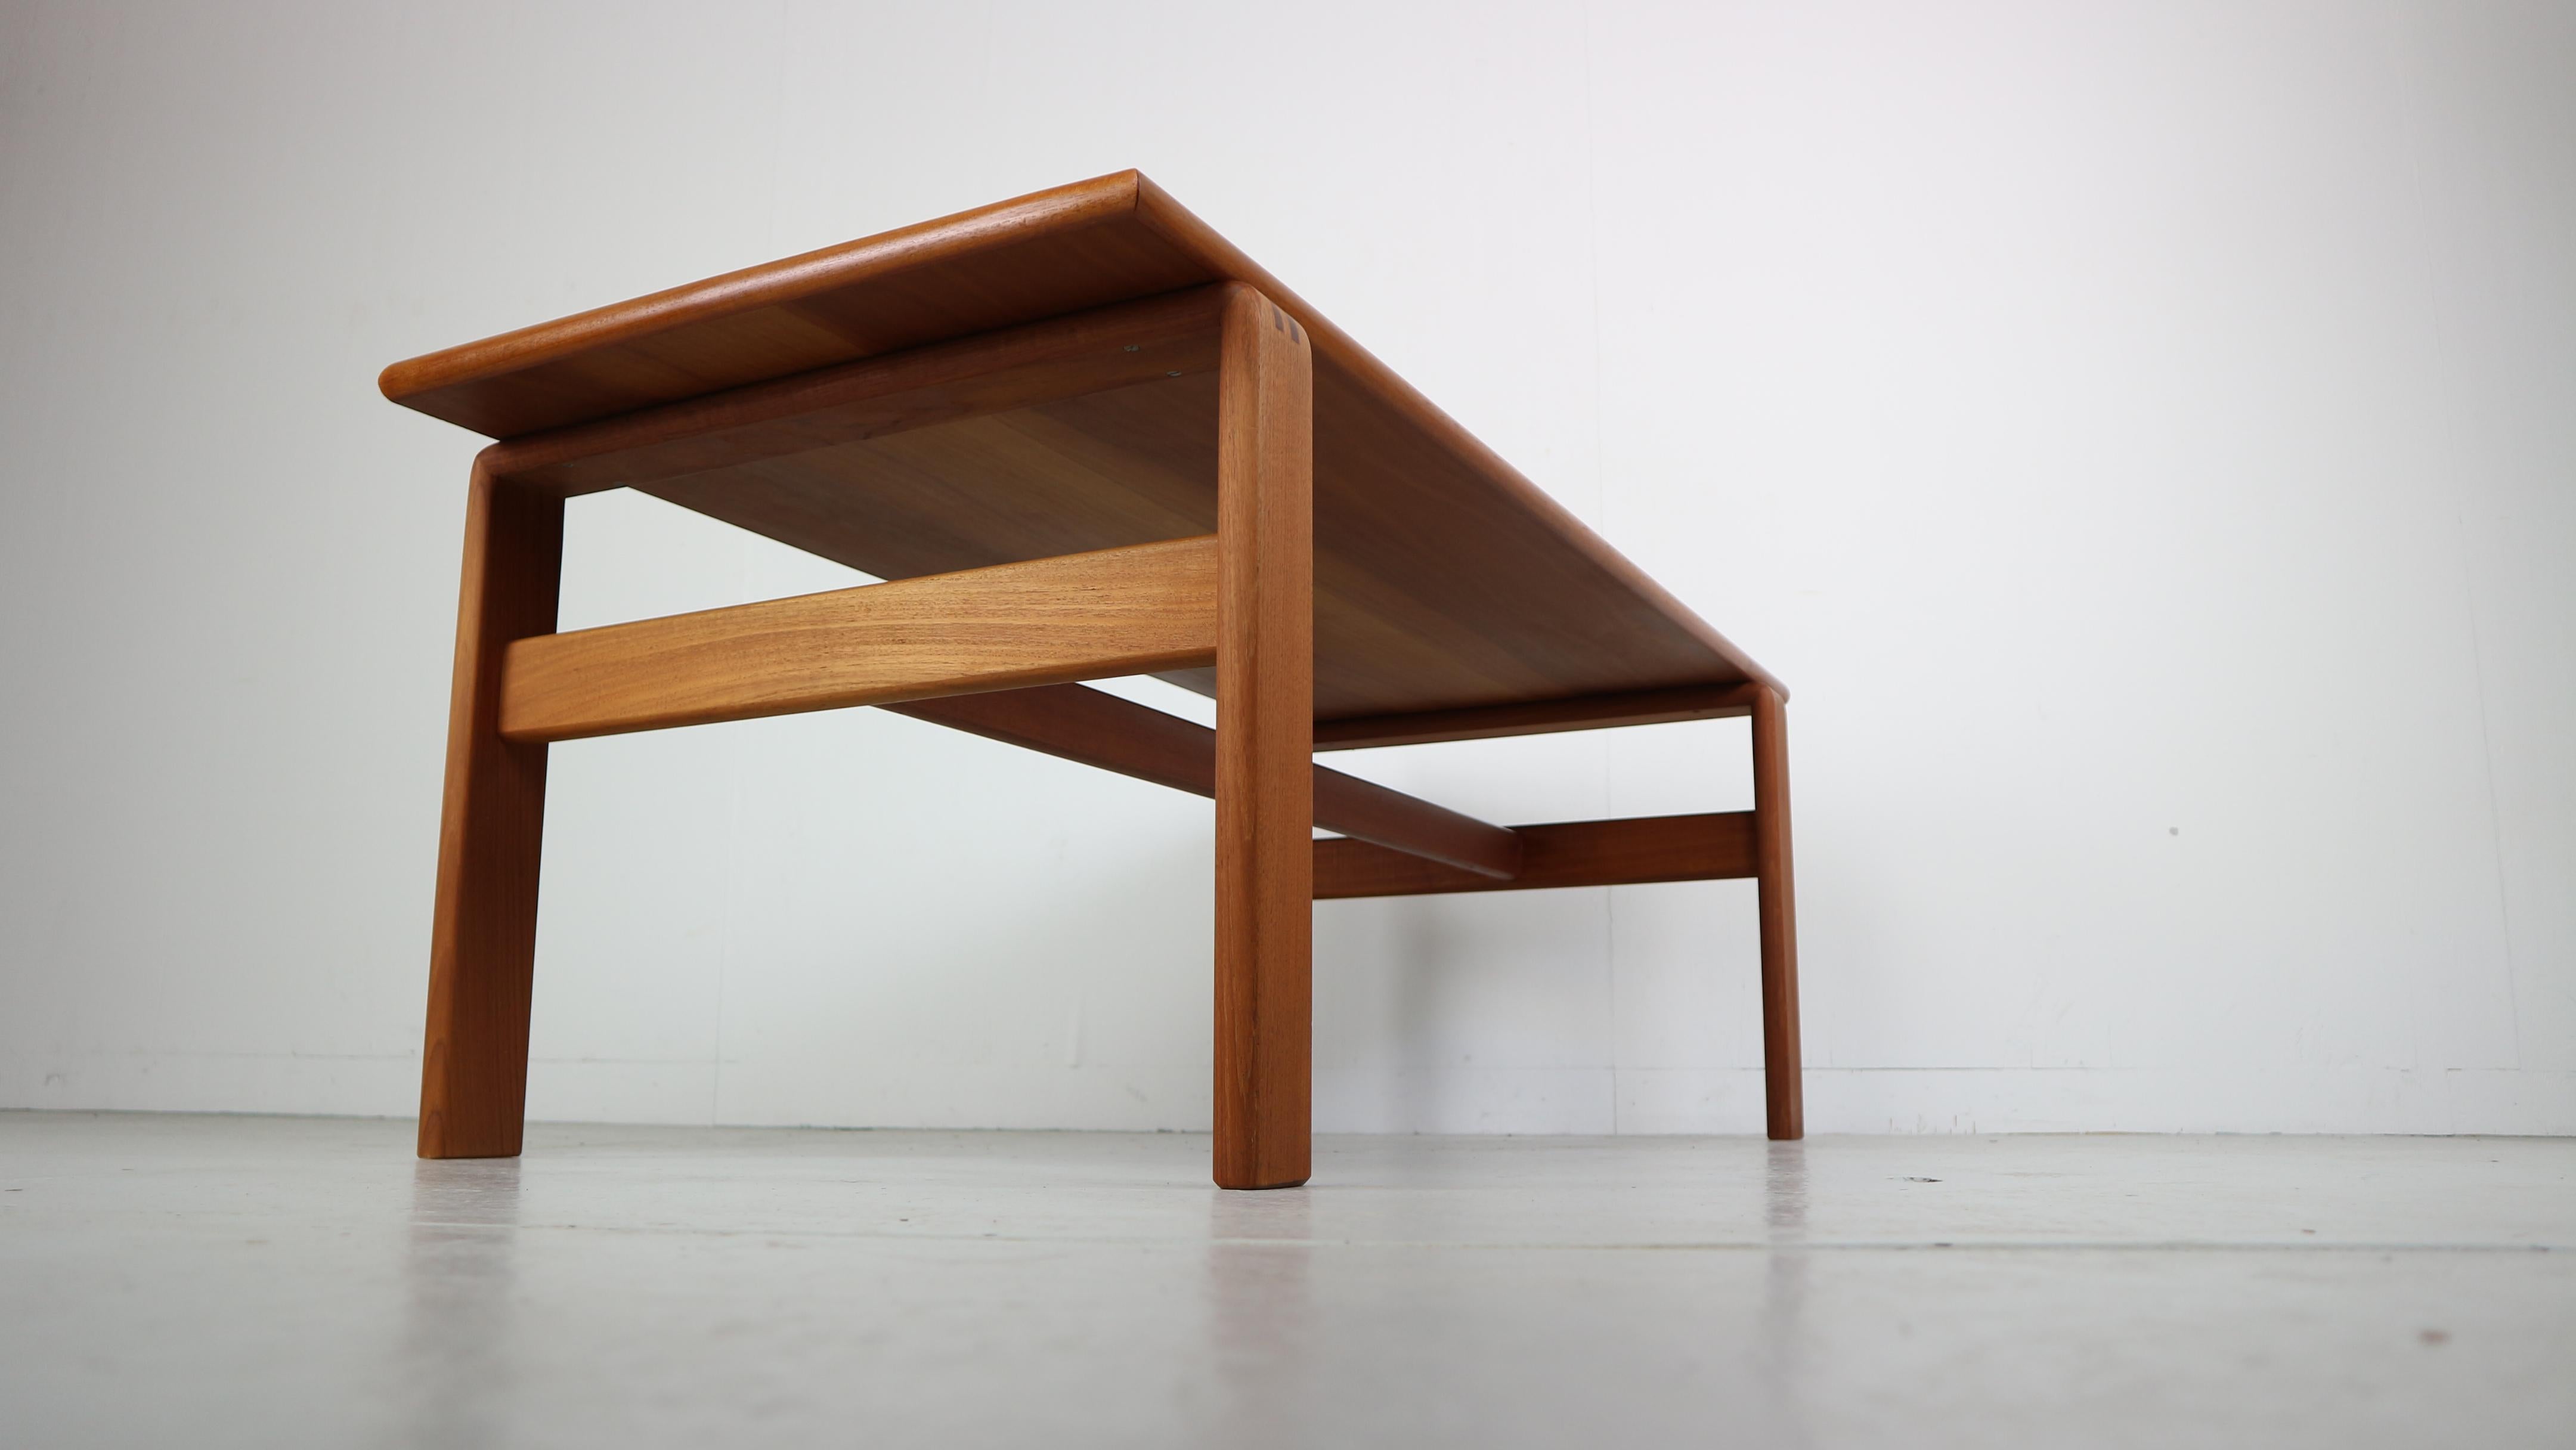 Teak coffee-table or end table from the 1970s.